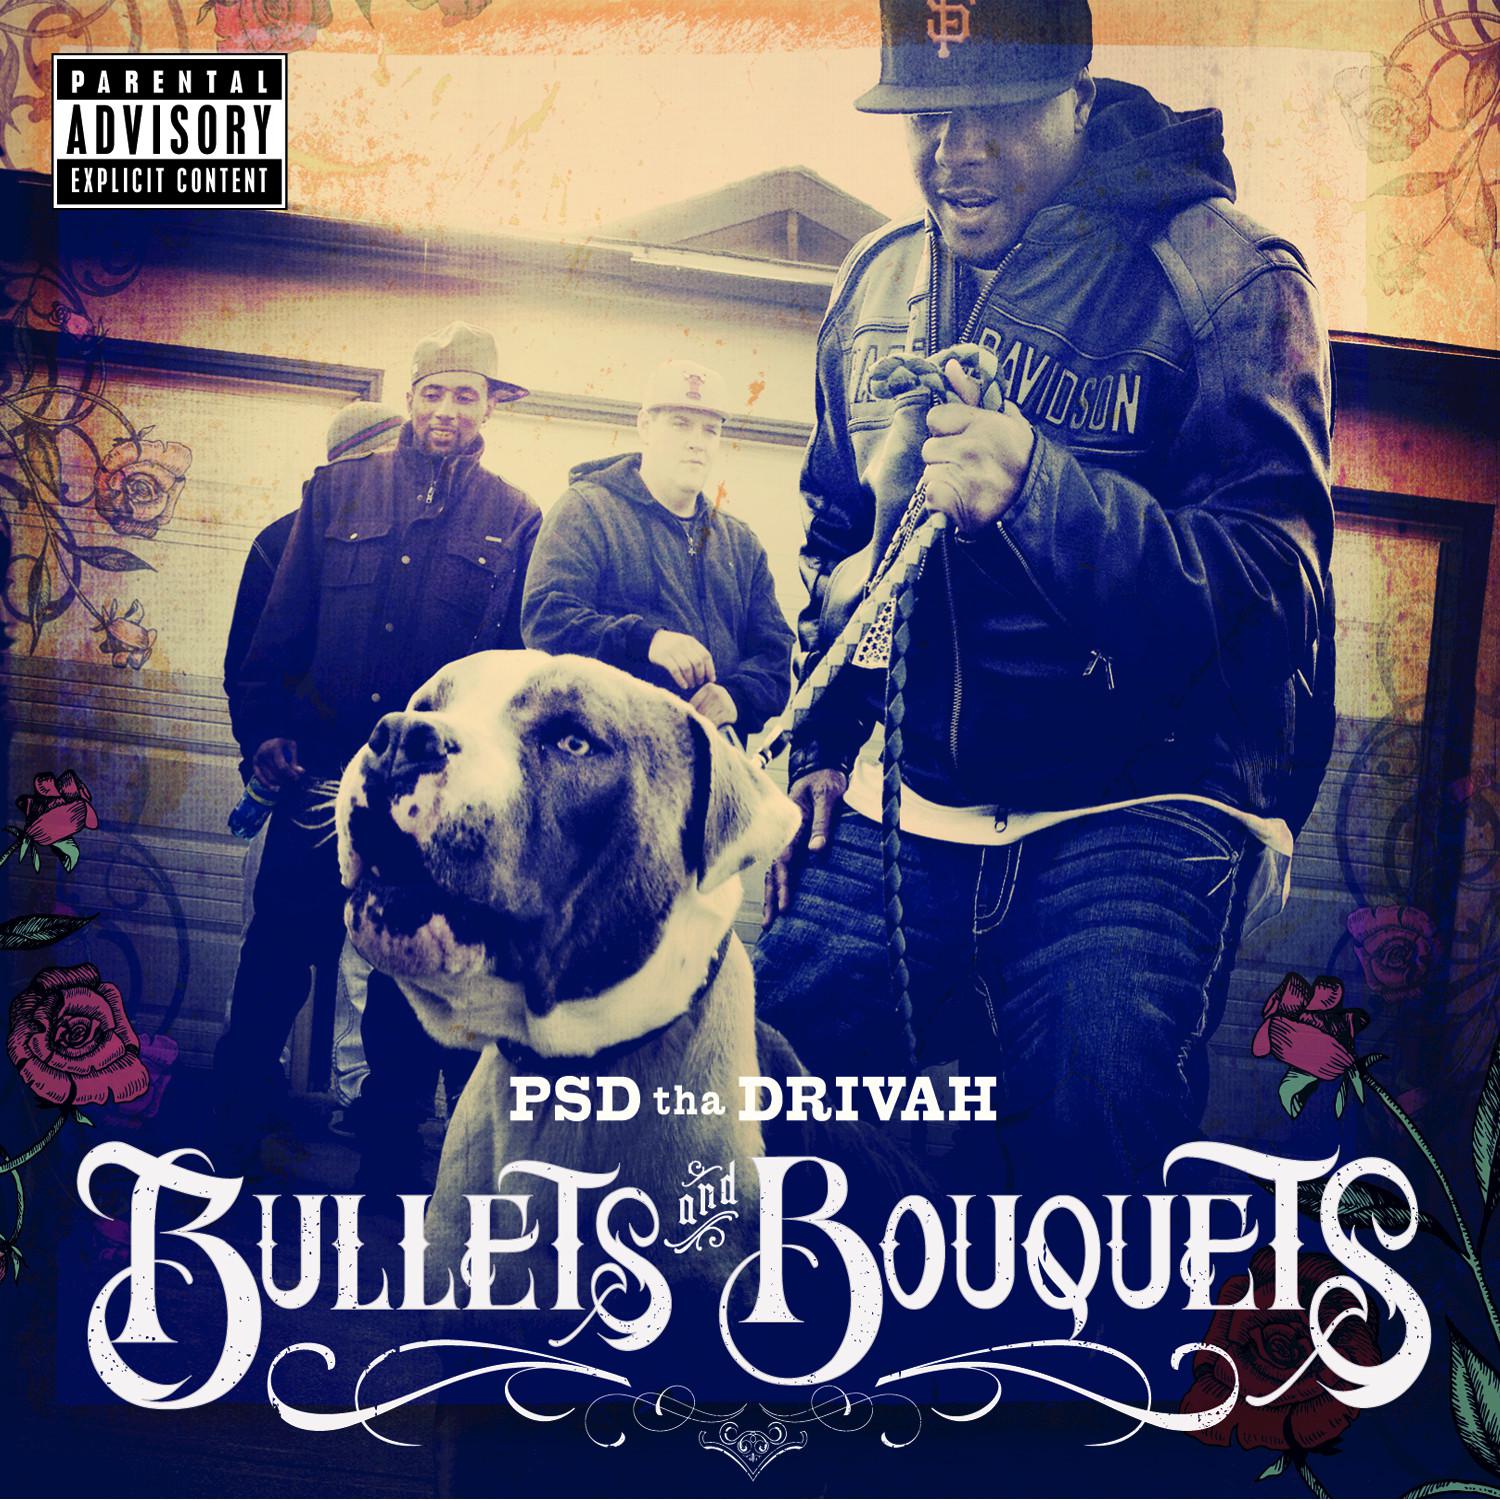 Bullets and Bouquets